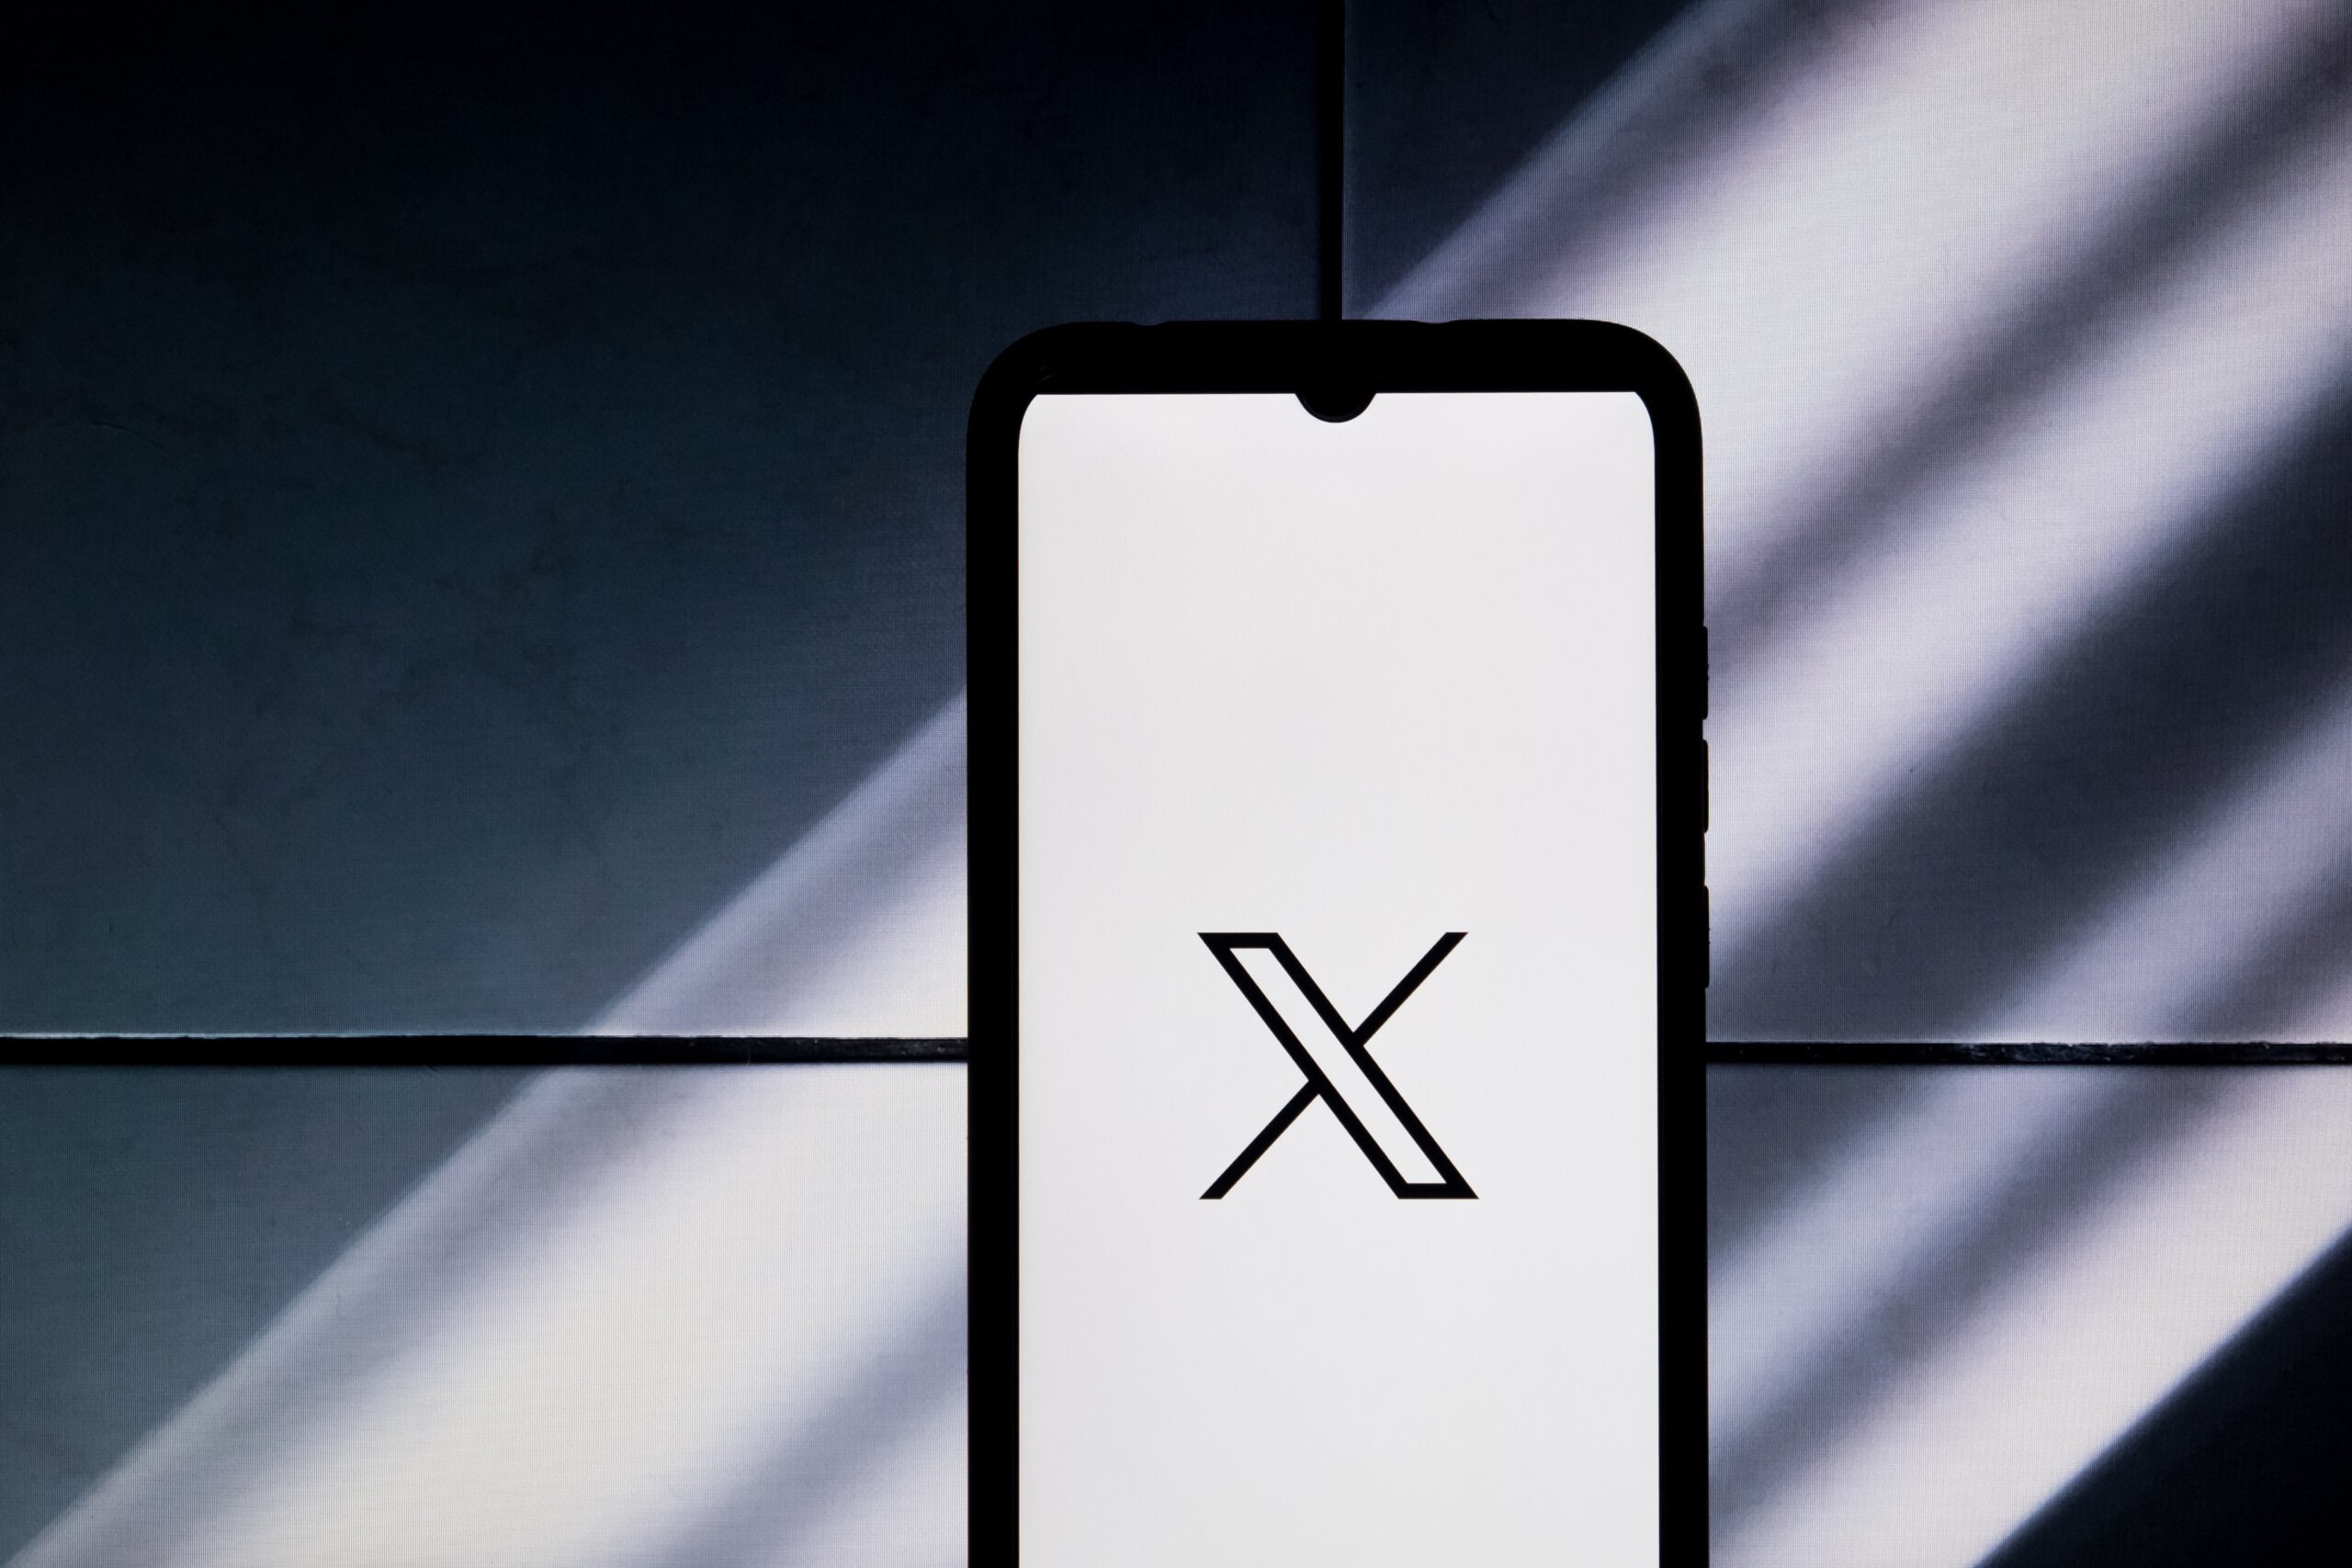 X on Android